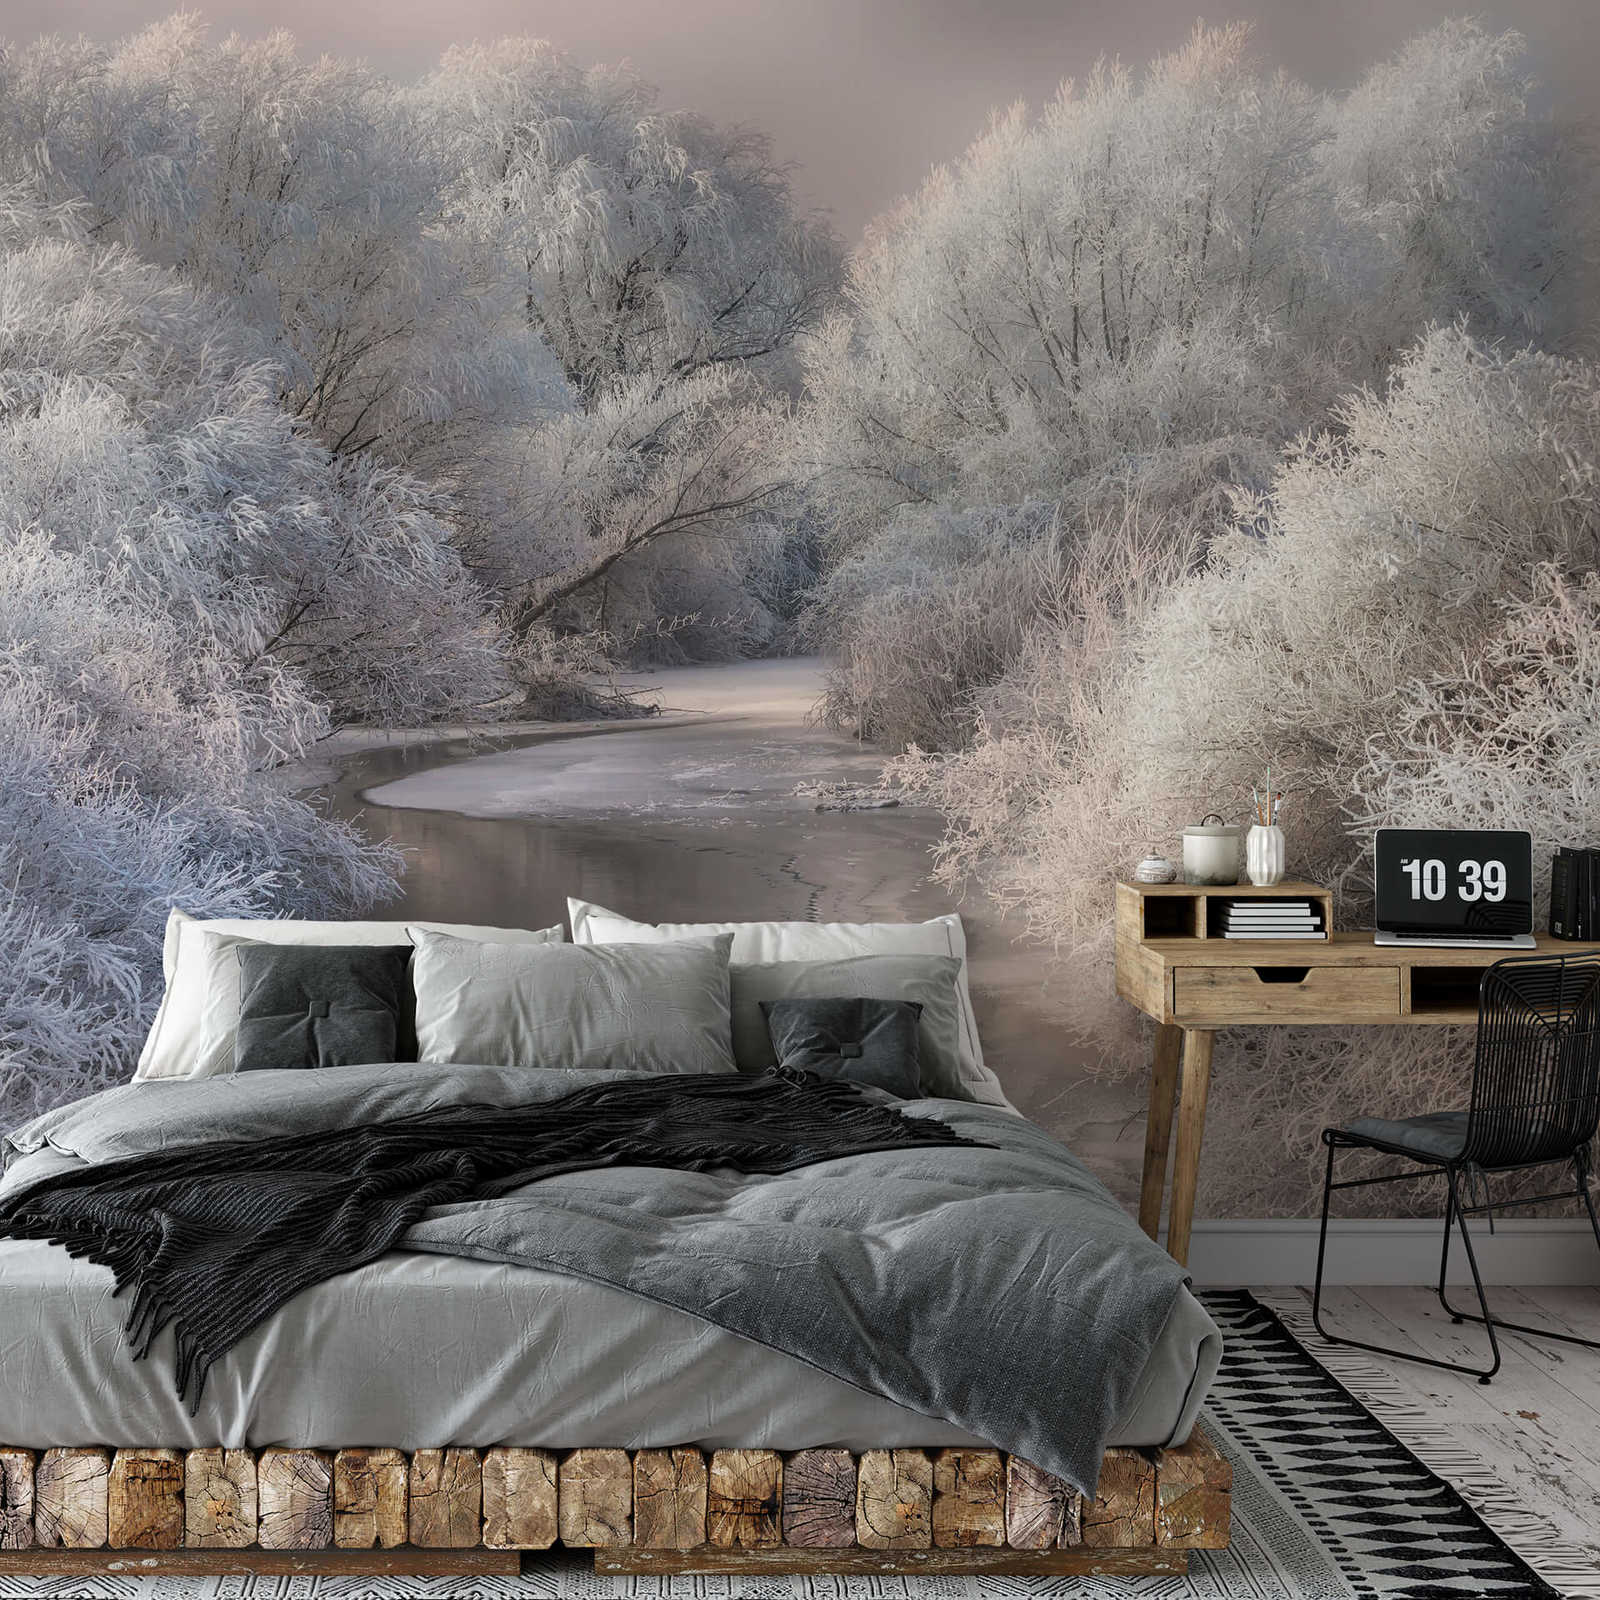             Photo wallpaper frozen forest with river - white, grey
        